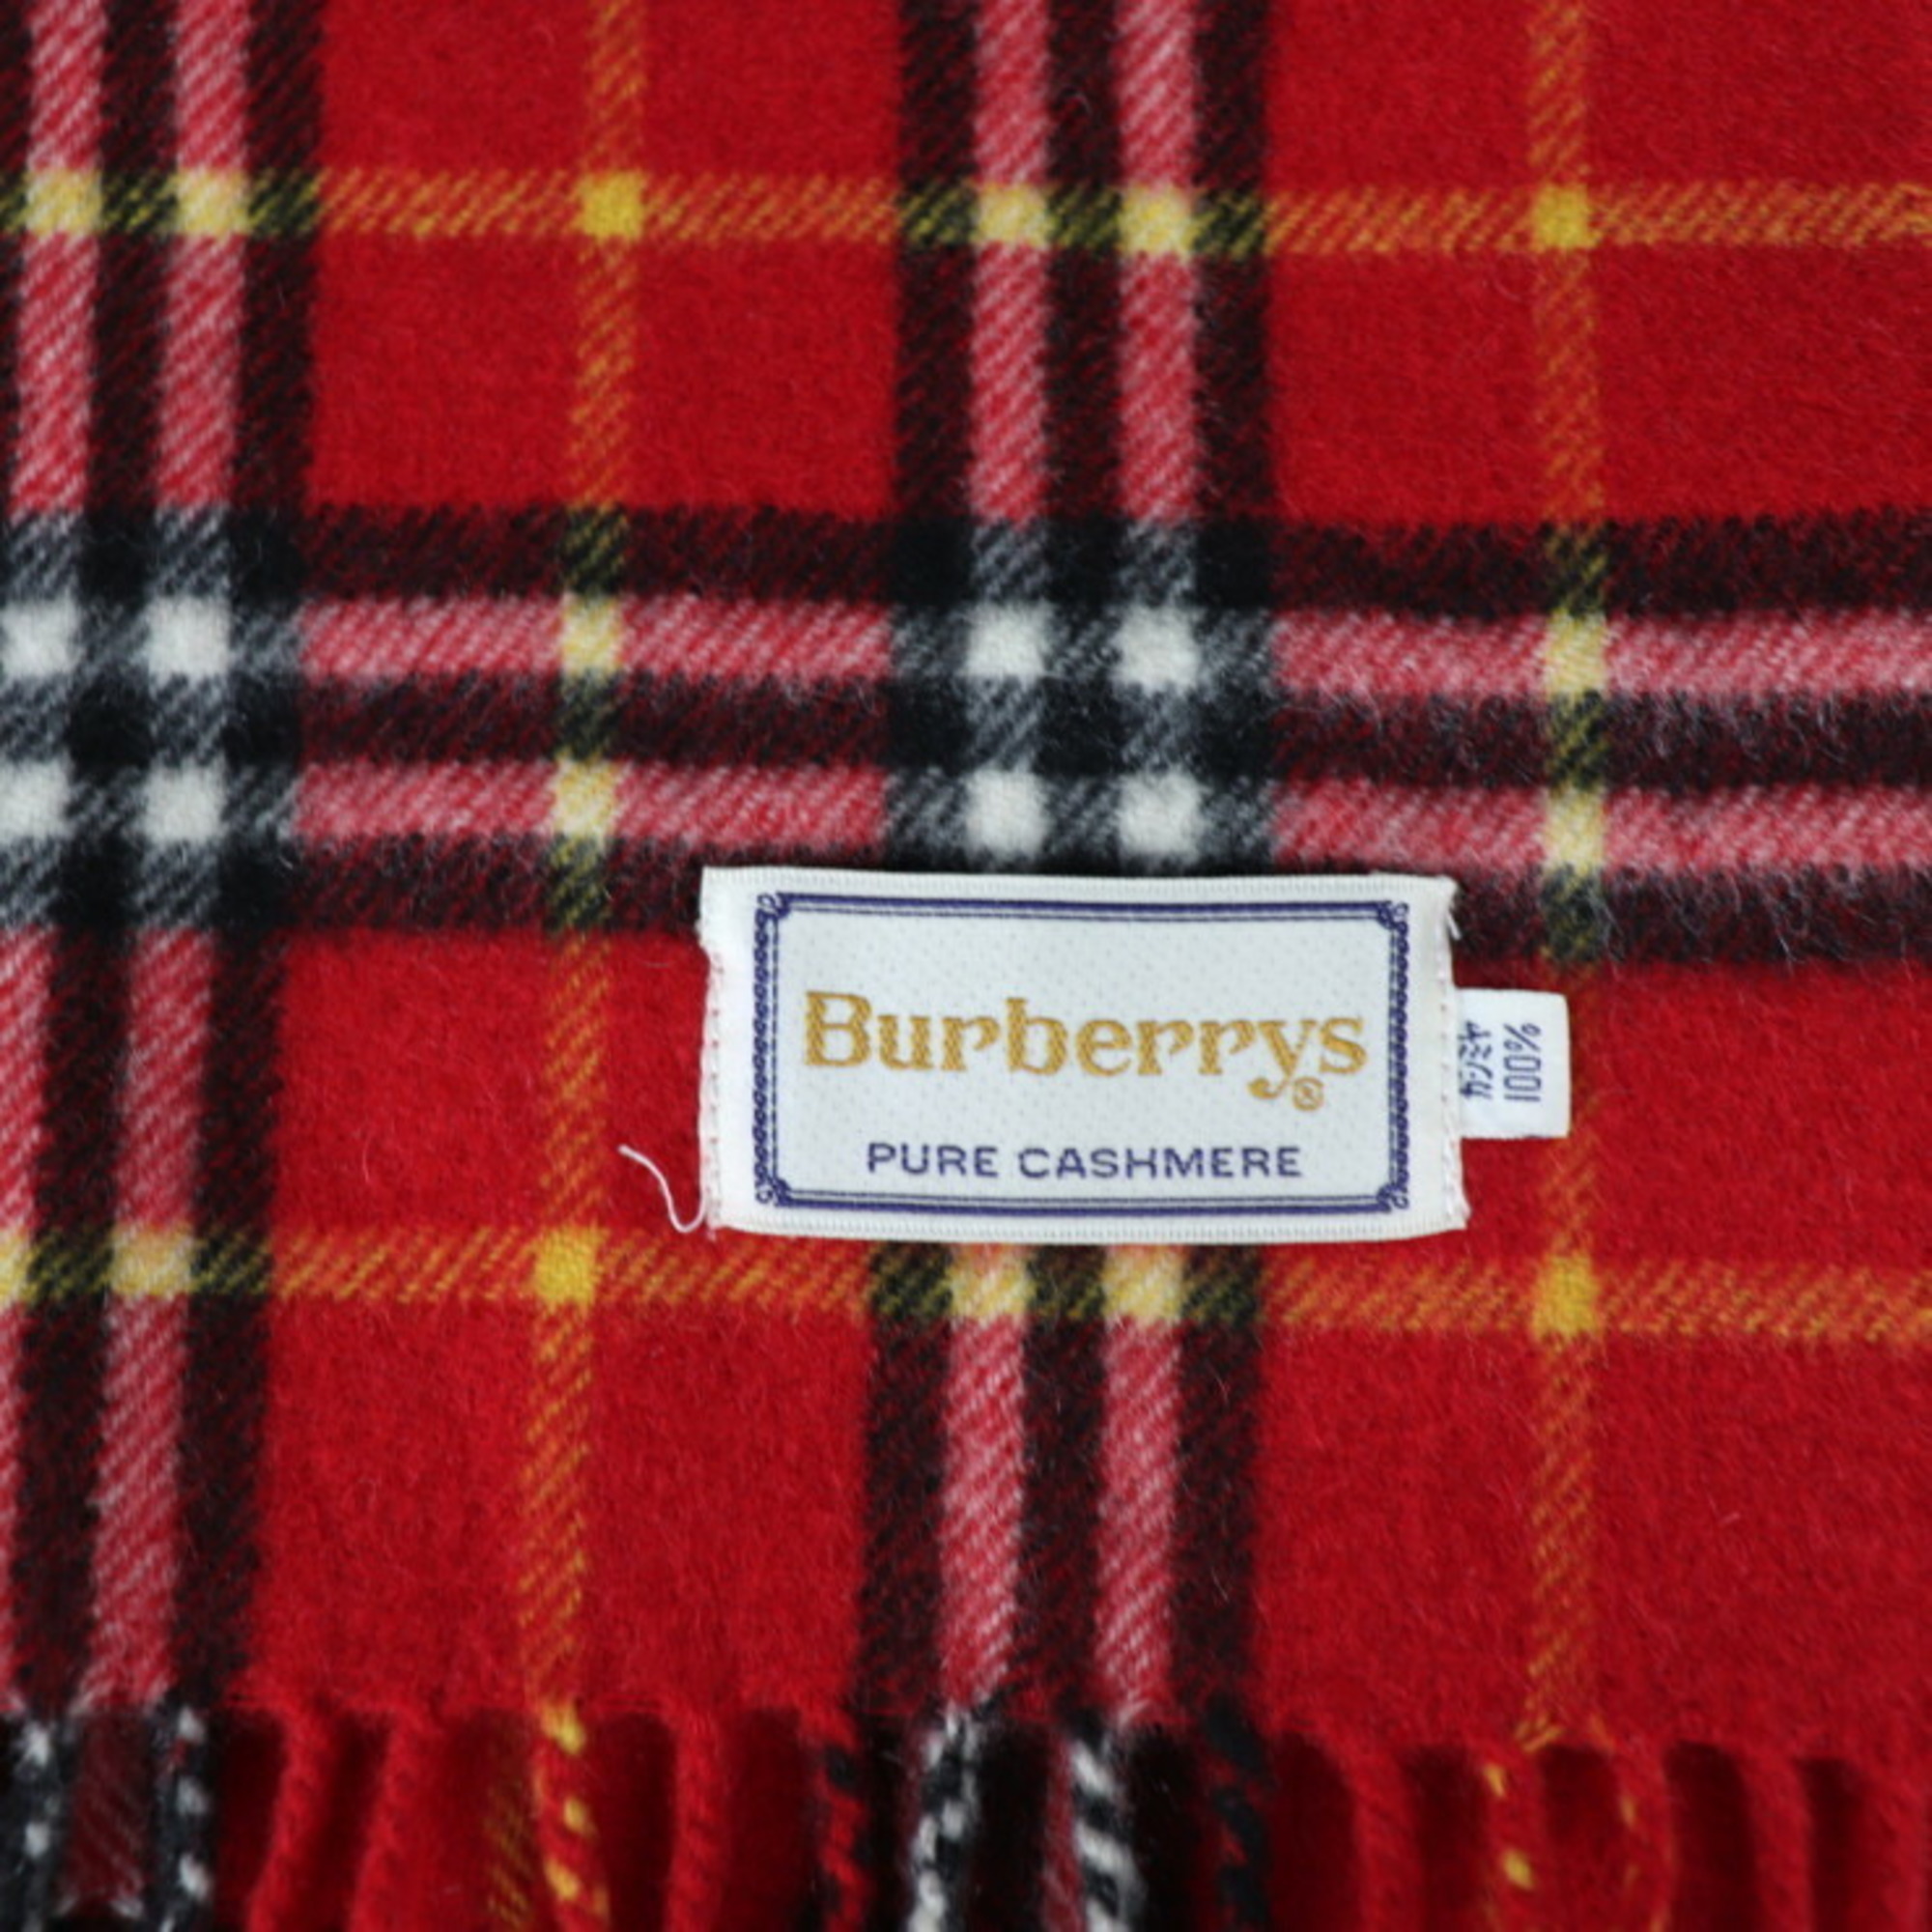 Burberrys Burberry scarf cashmere 100% red check pattern